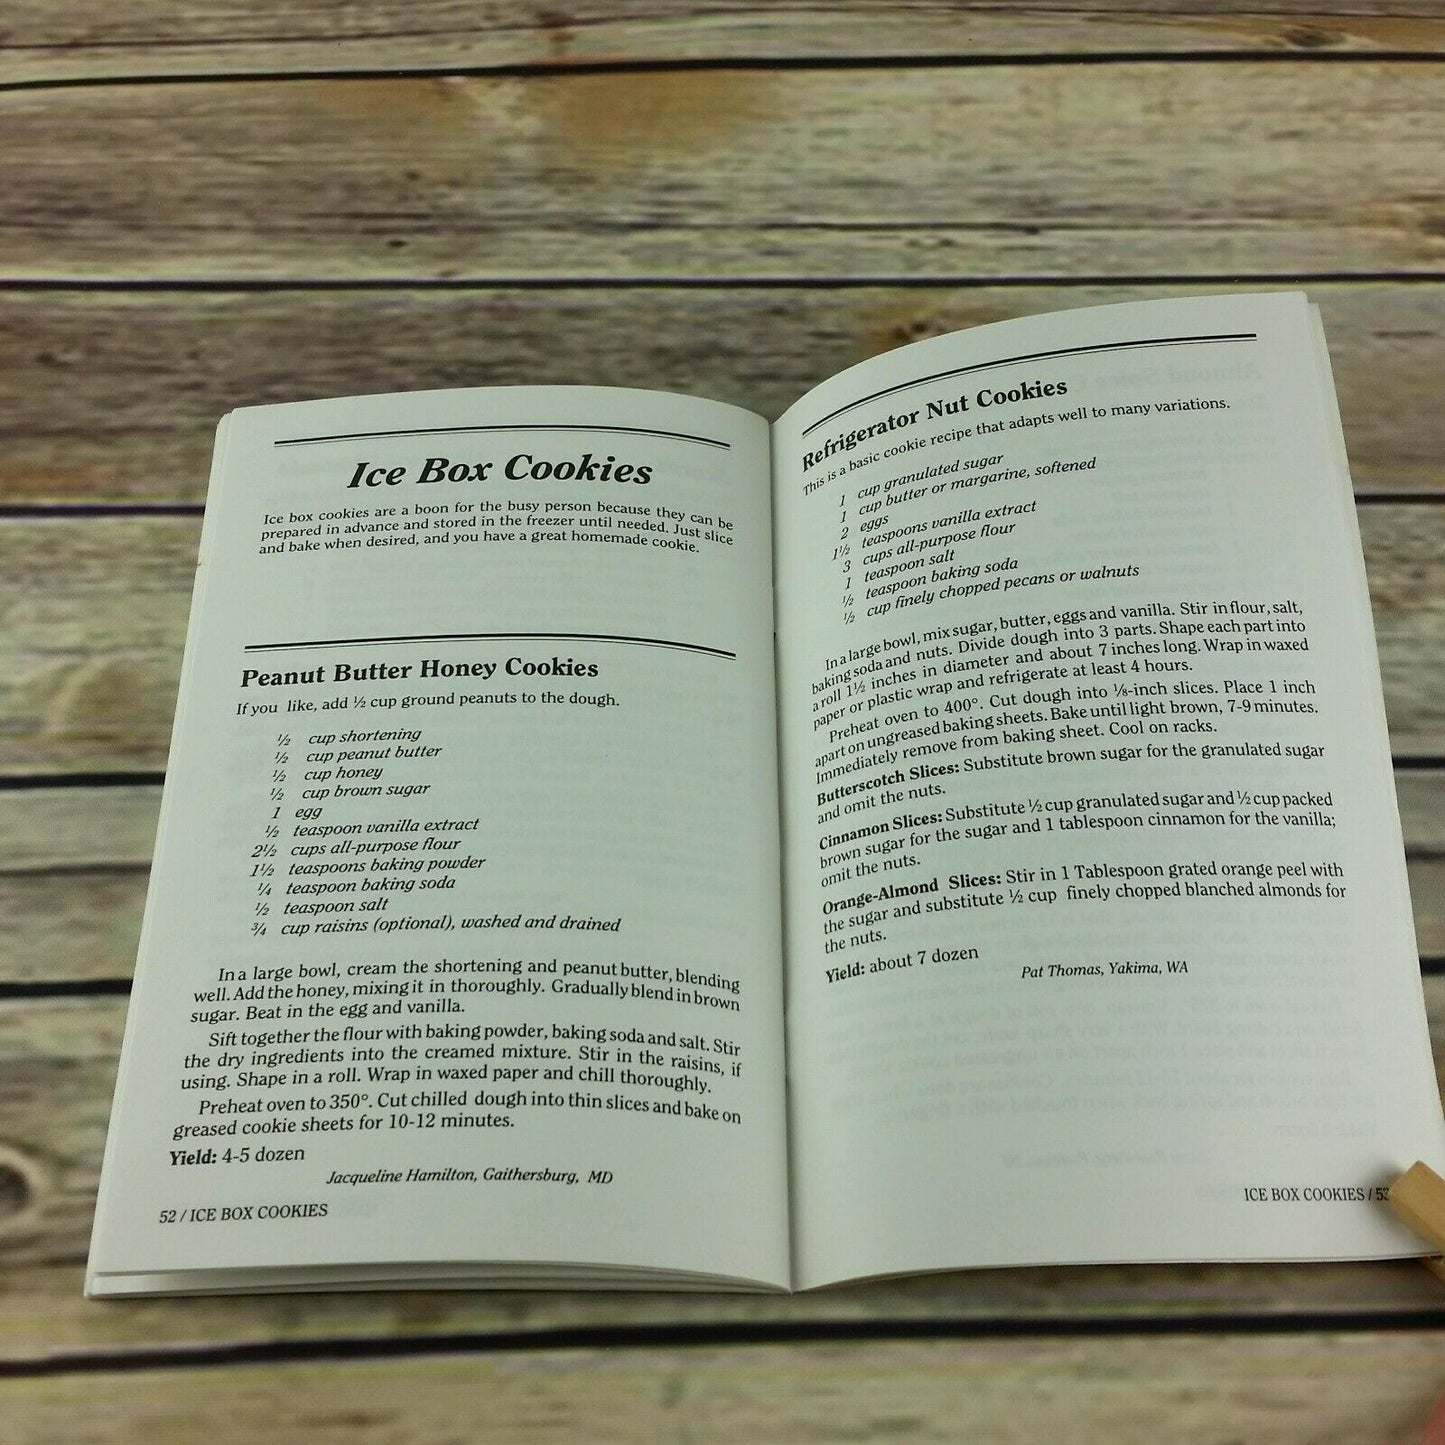 Vintage Cookbook Cookies Crunchy Chewy Nutty Crumbly 1989 American Cooking Guild - At Grandma's Table